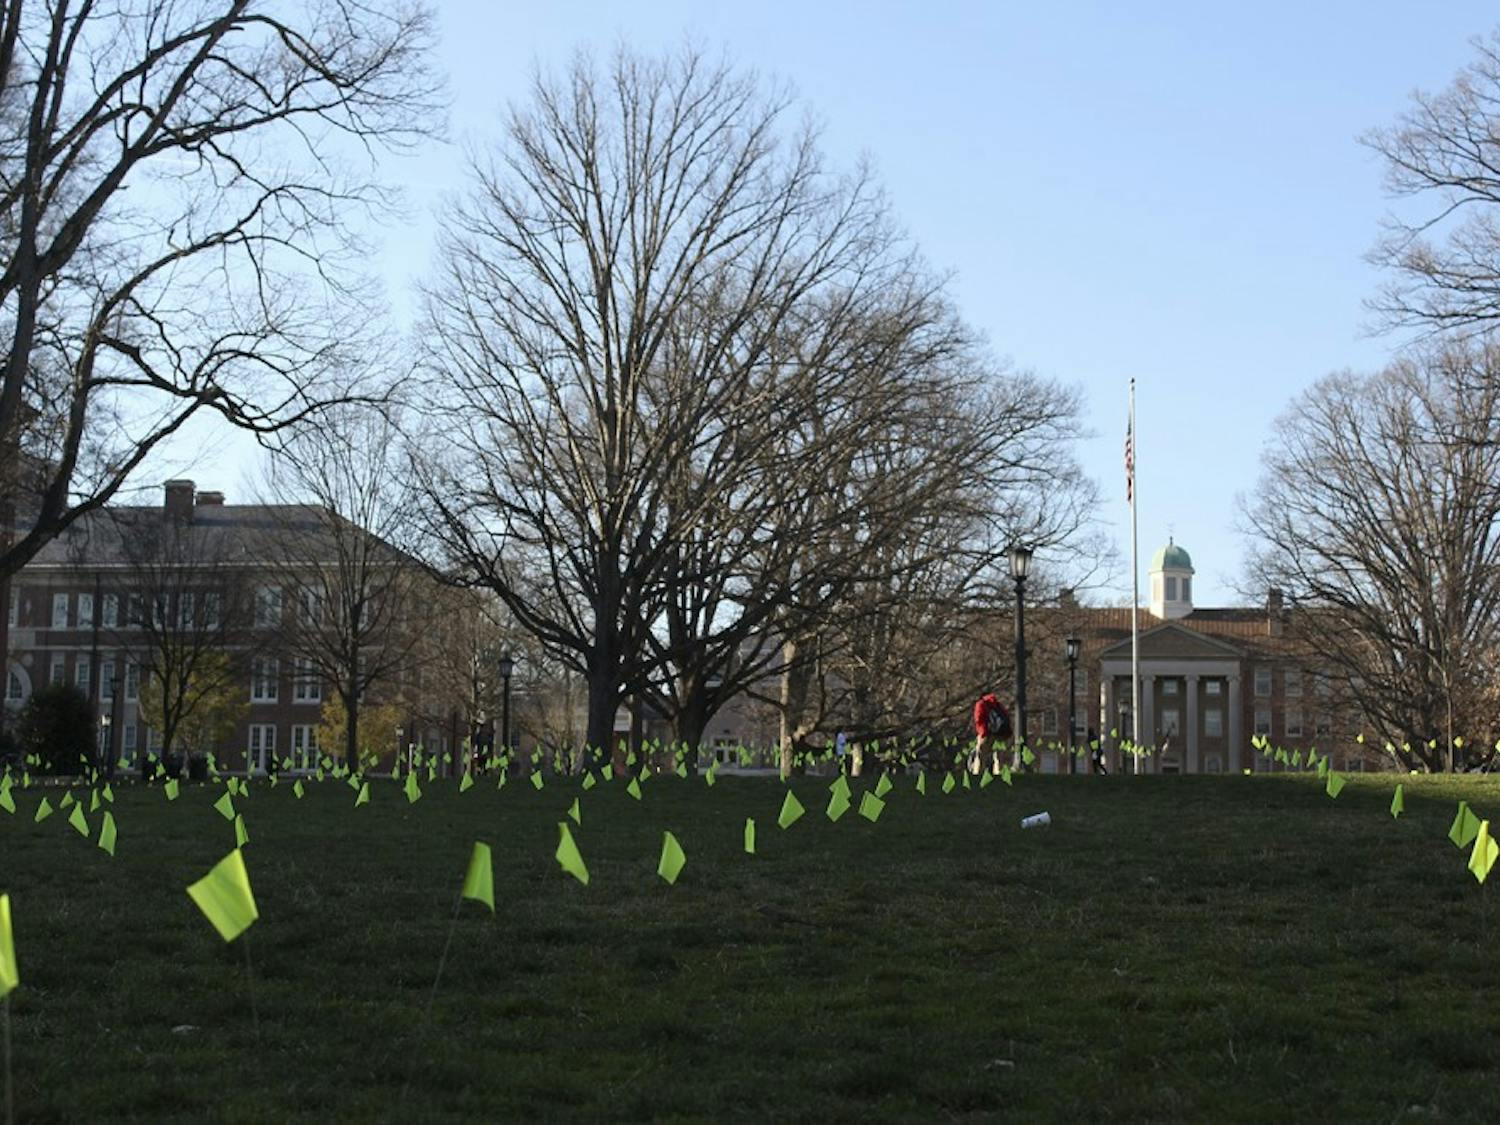 Flags were placed in the quad for mental health awareness this weekend.